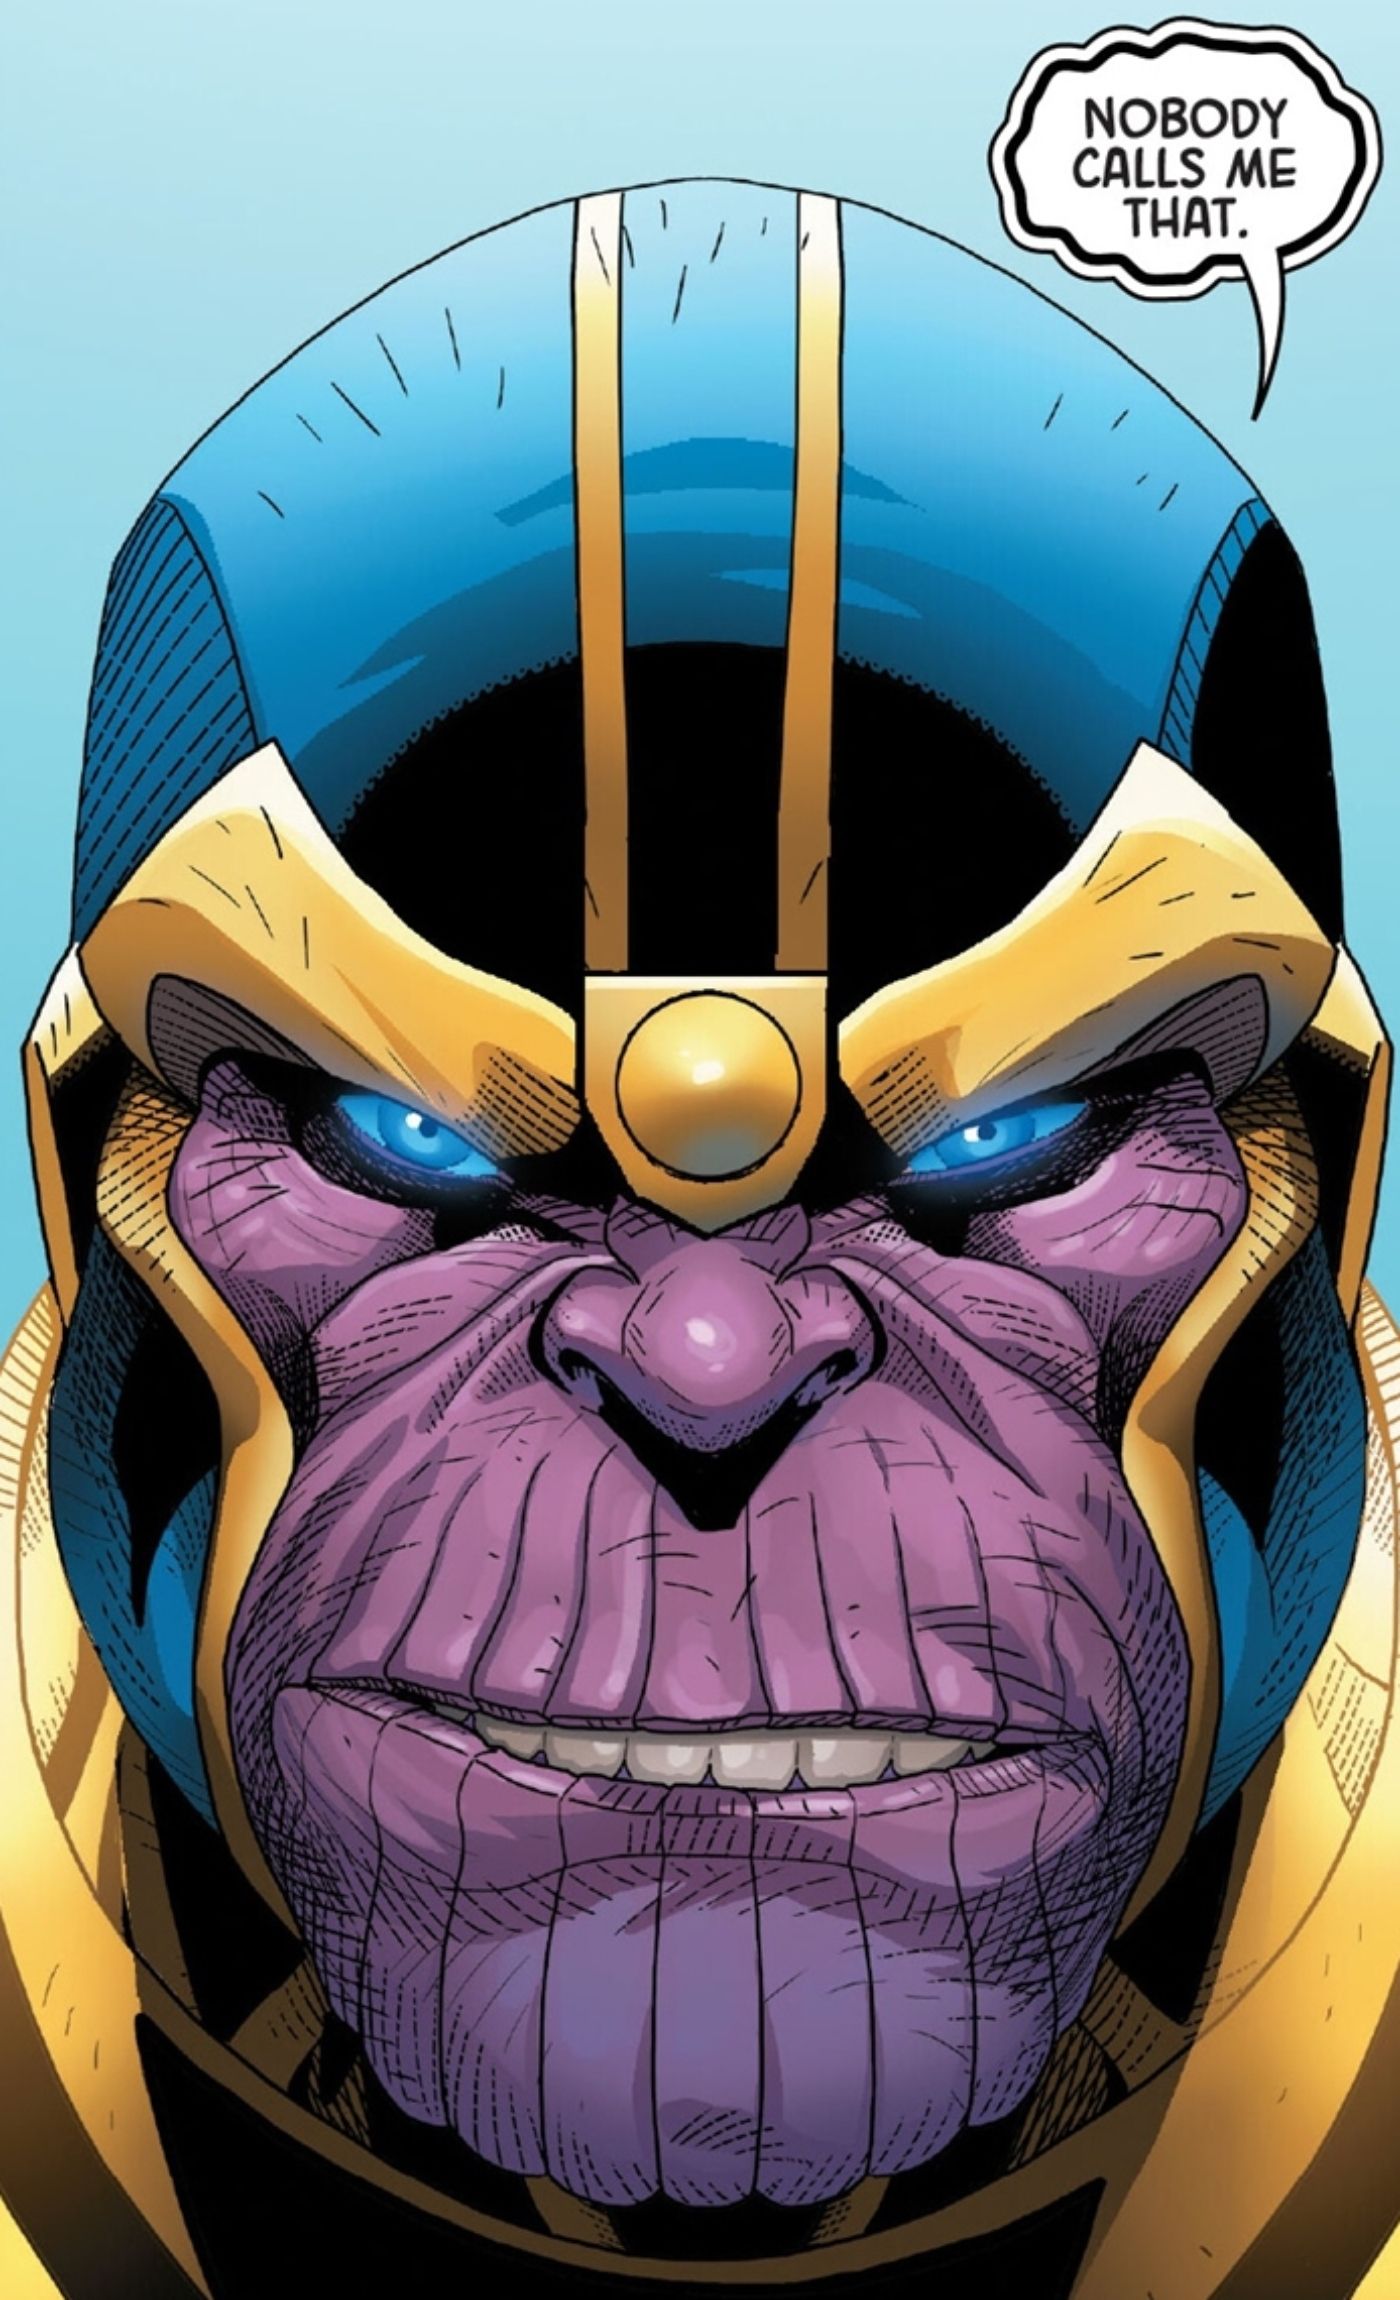 Thanos getting angry at someone calling him an insulting nickname, saying, 